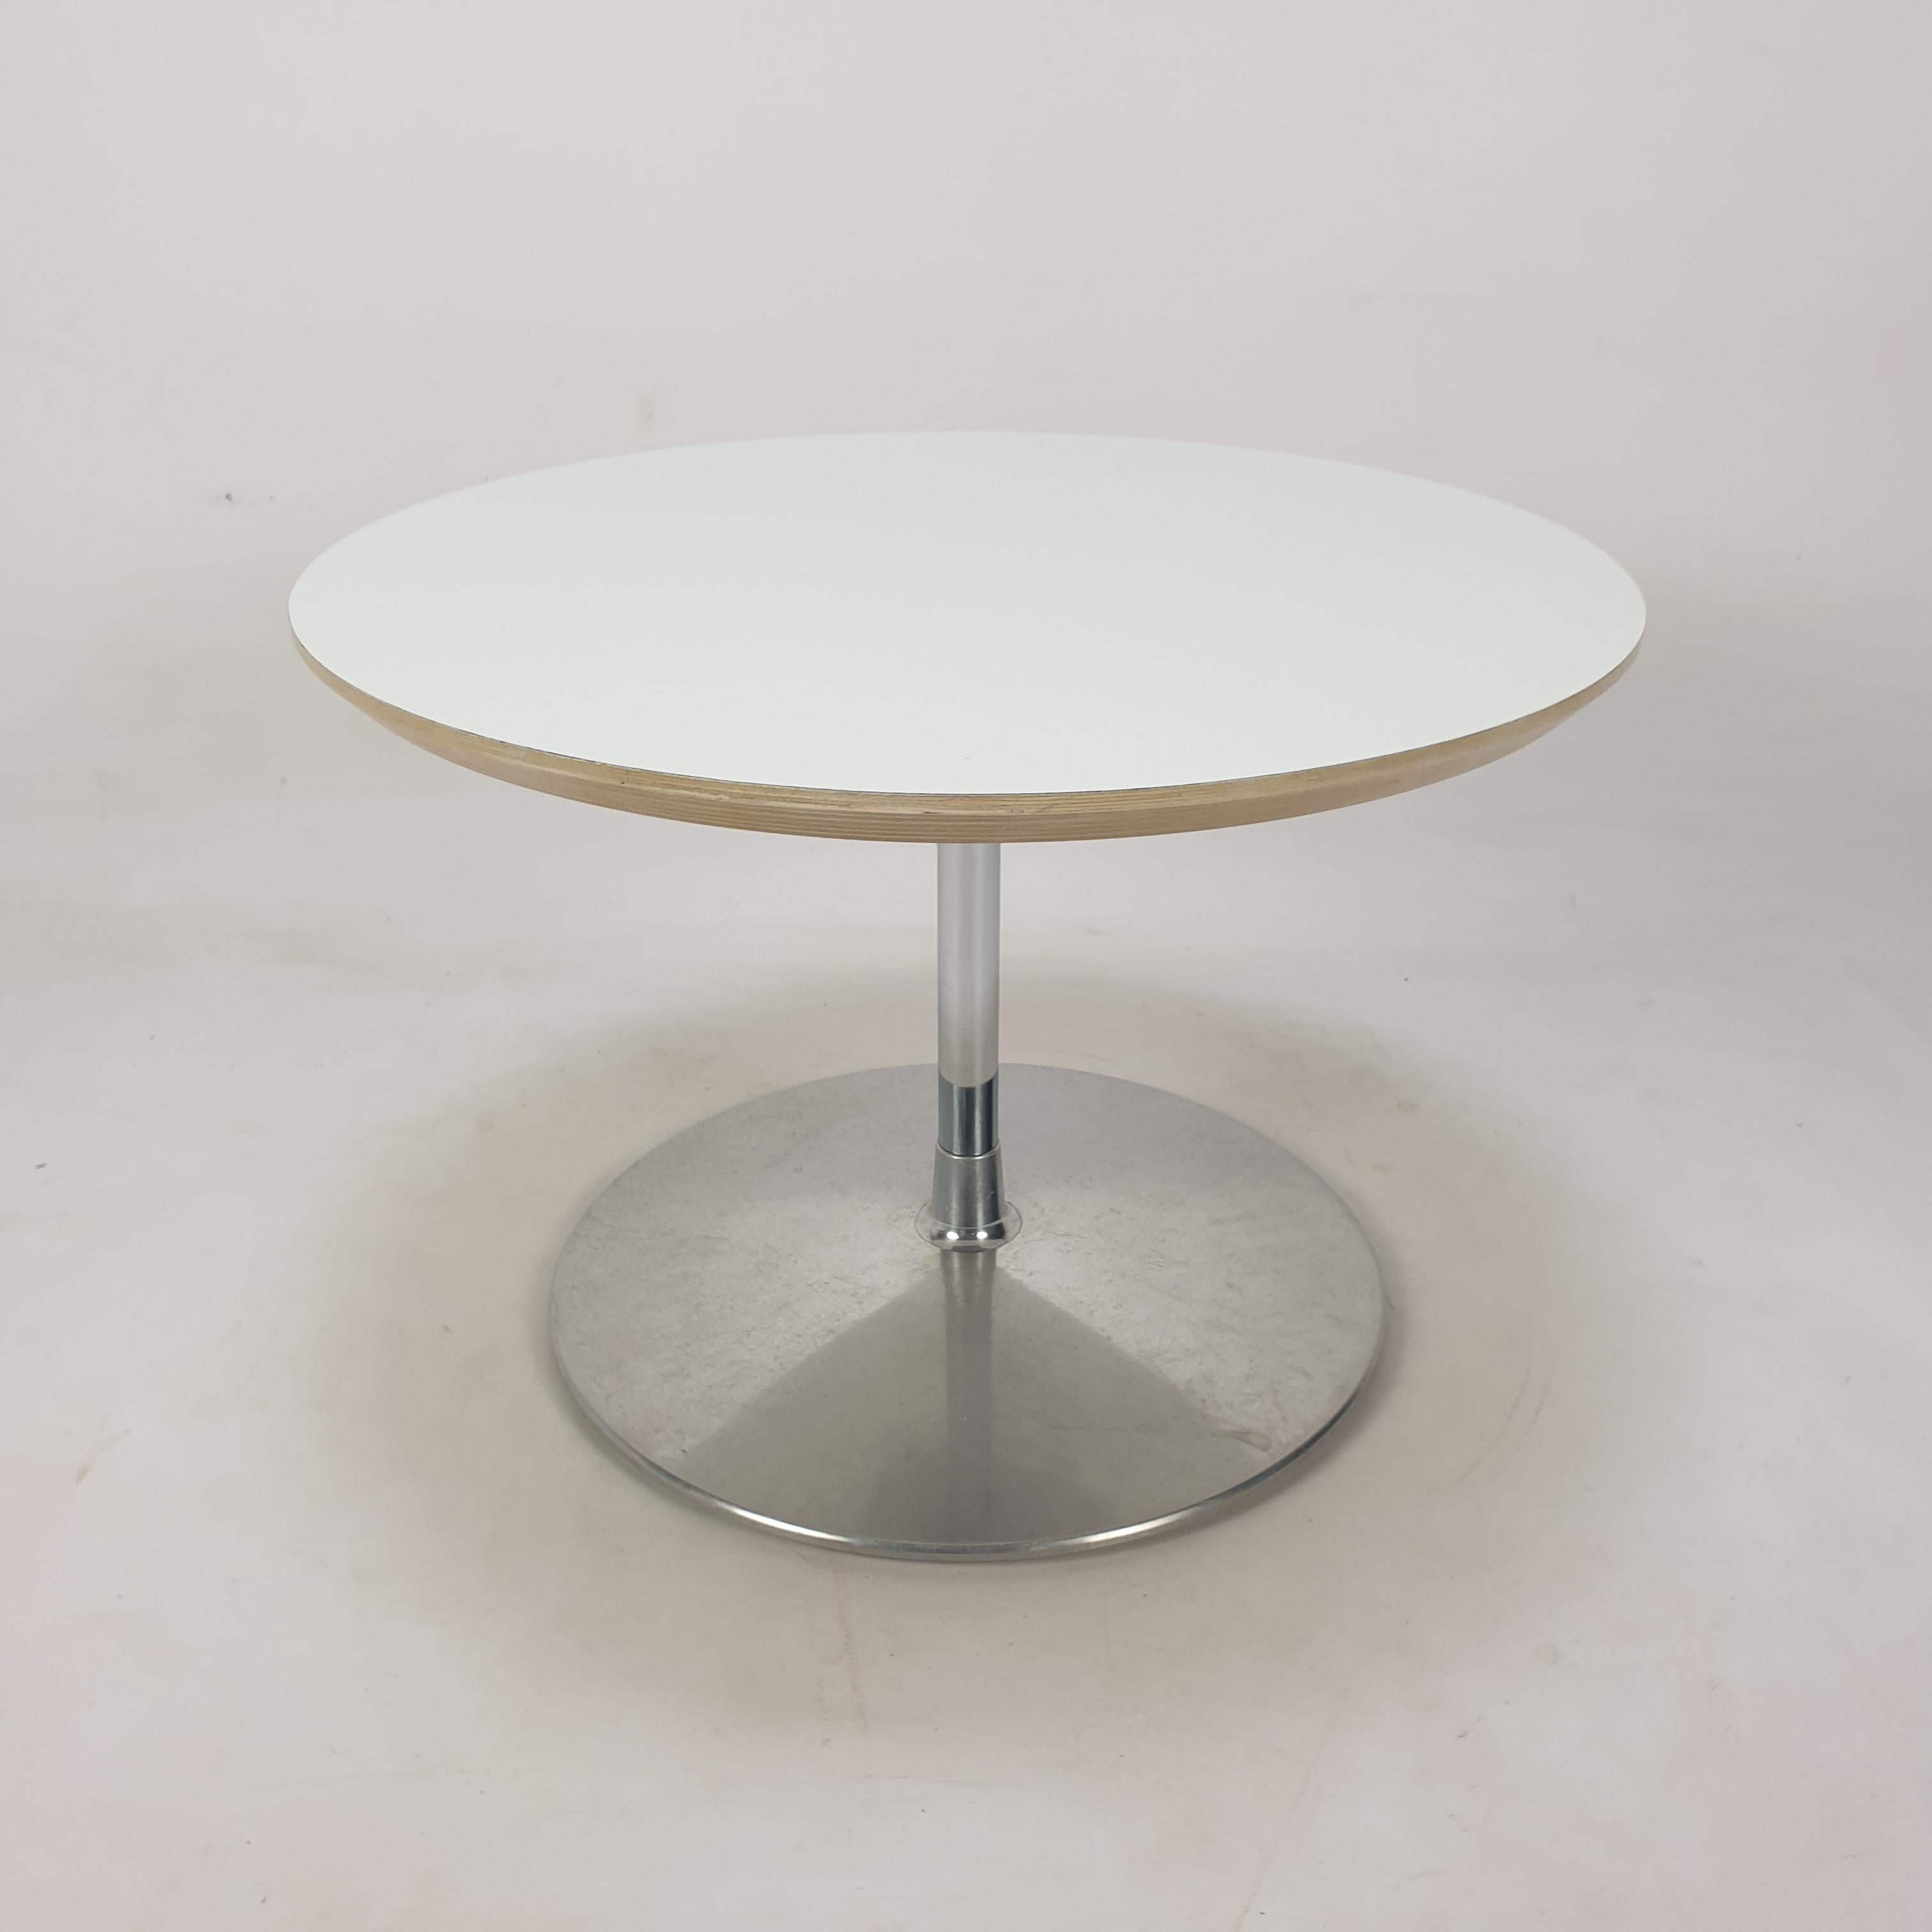 Very nice round coffee table, designed by Pierre Paulin in the 60's. 

The name of the table is 